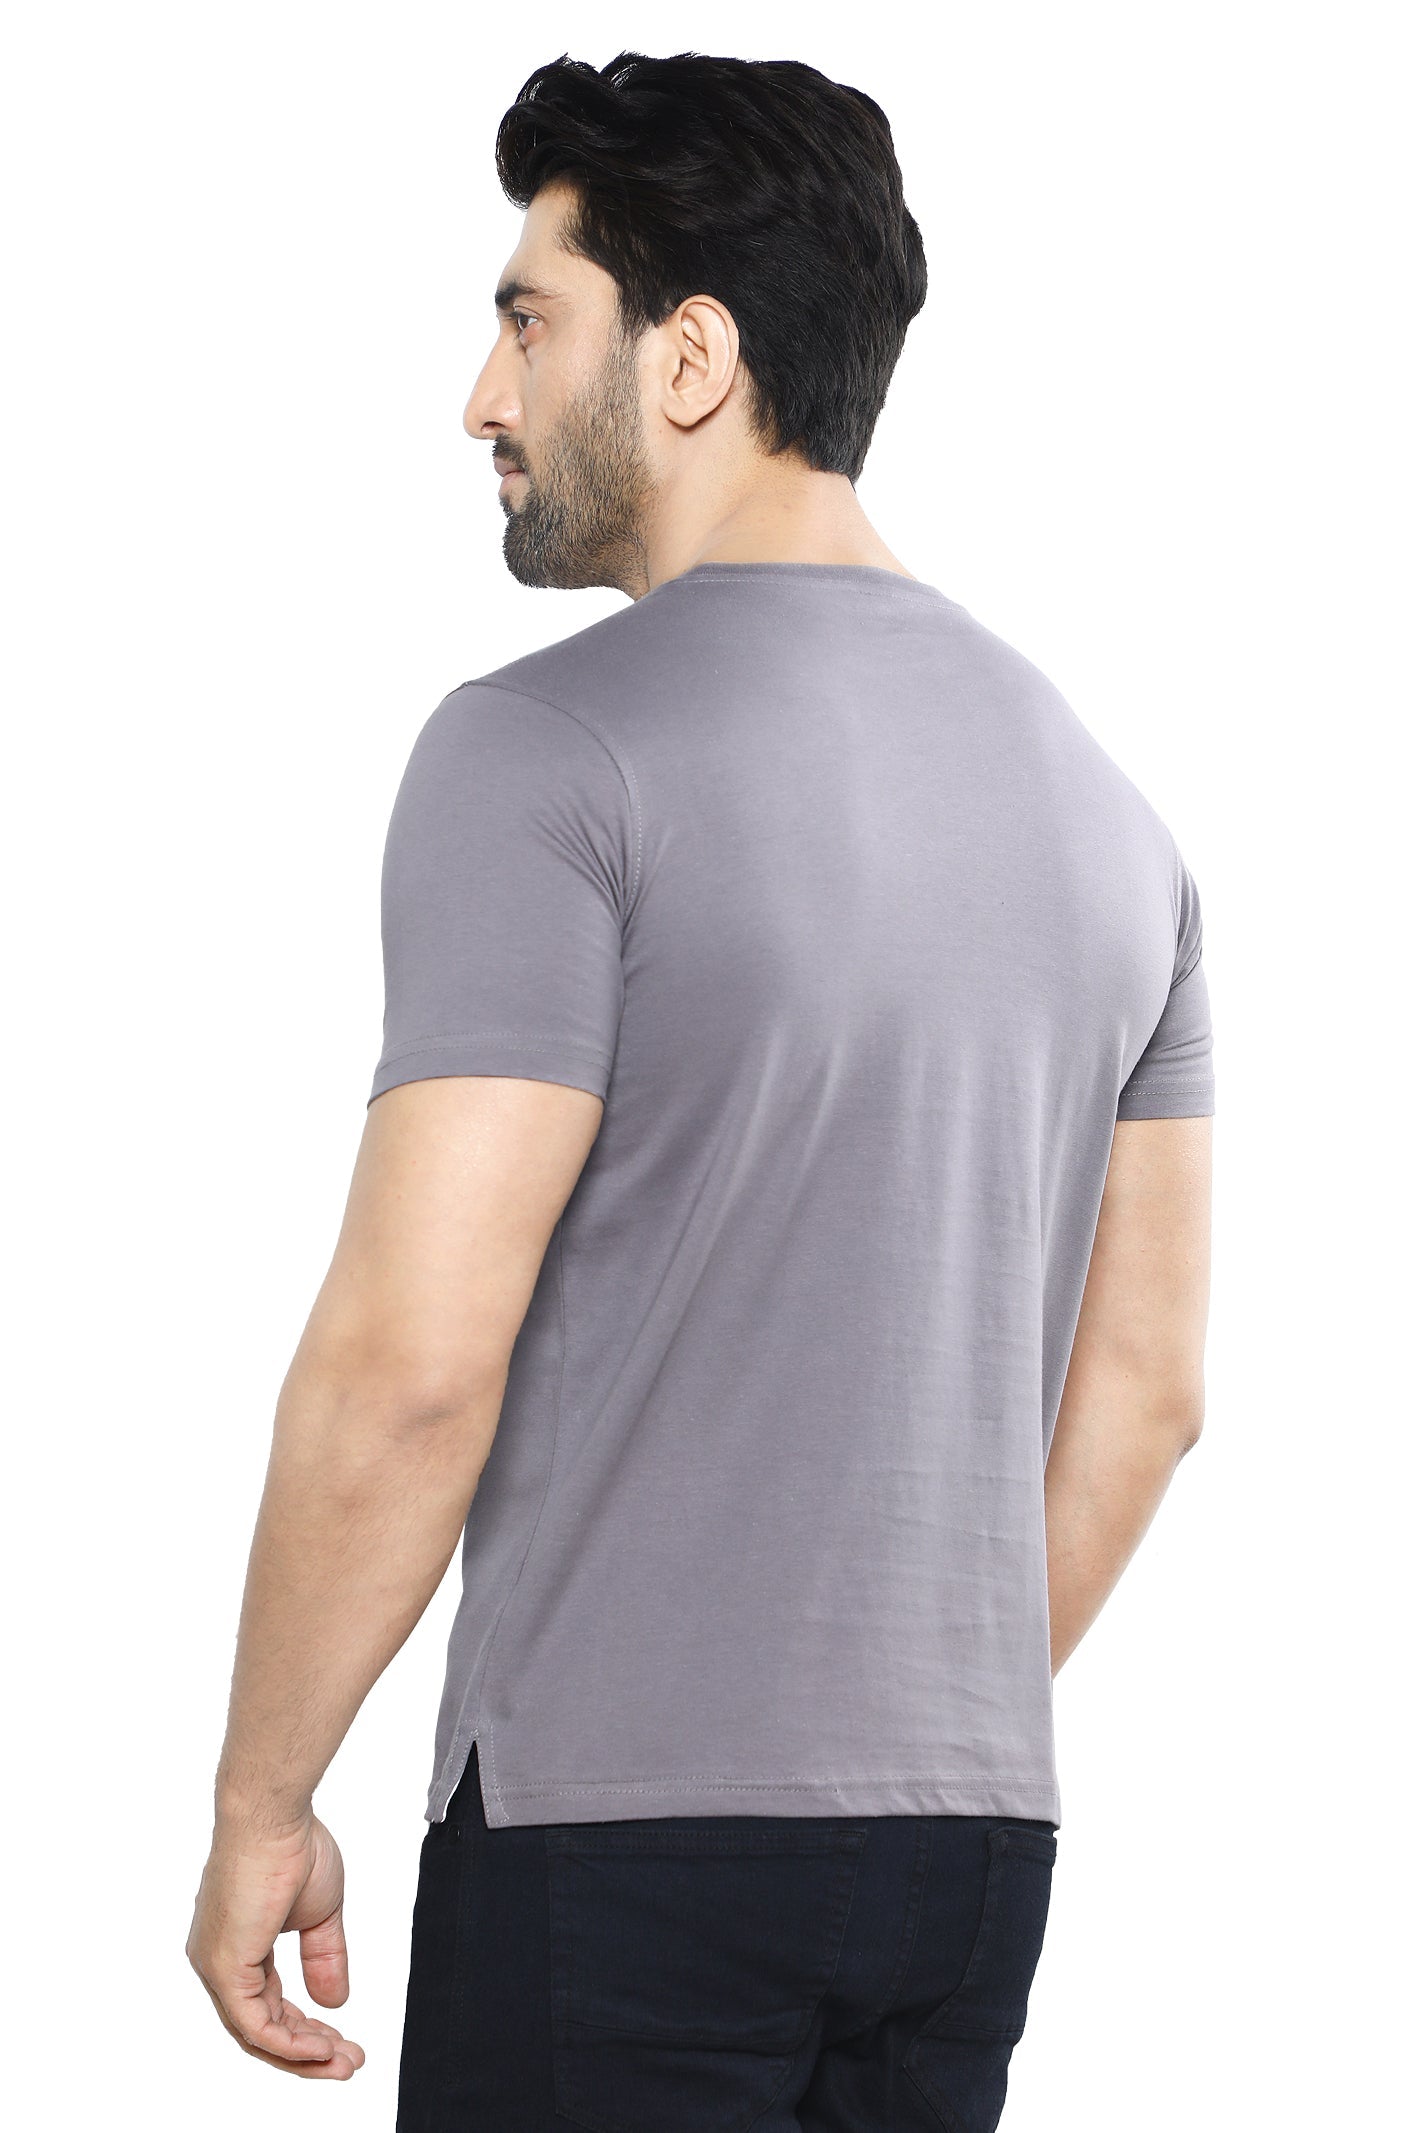 Diners Men's Round Neck T-Shirt SKU: NA824-GREY - Diners